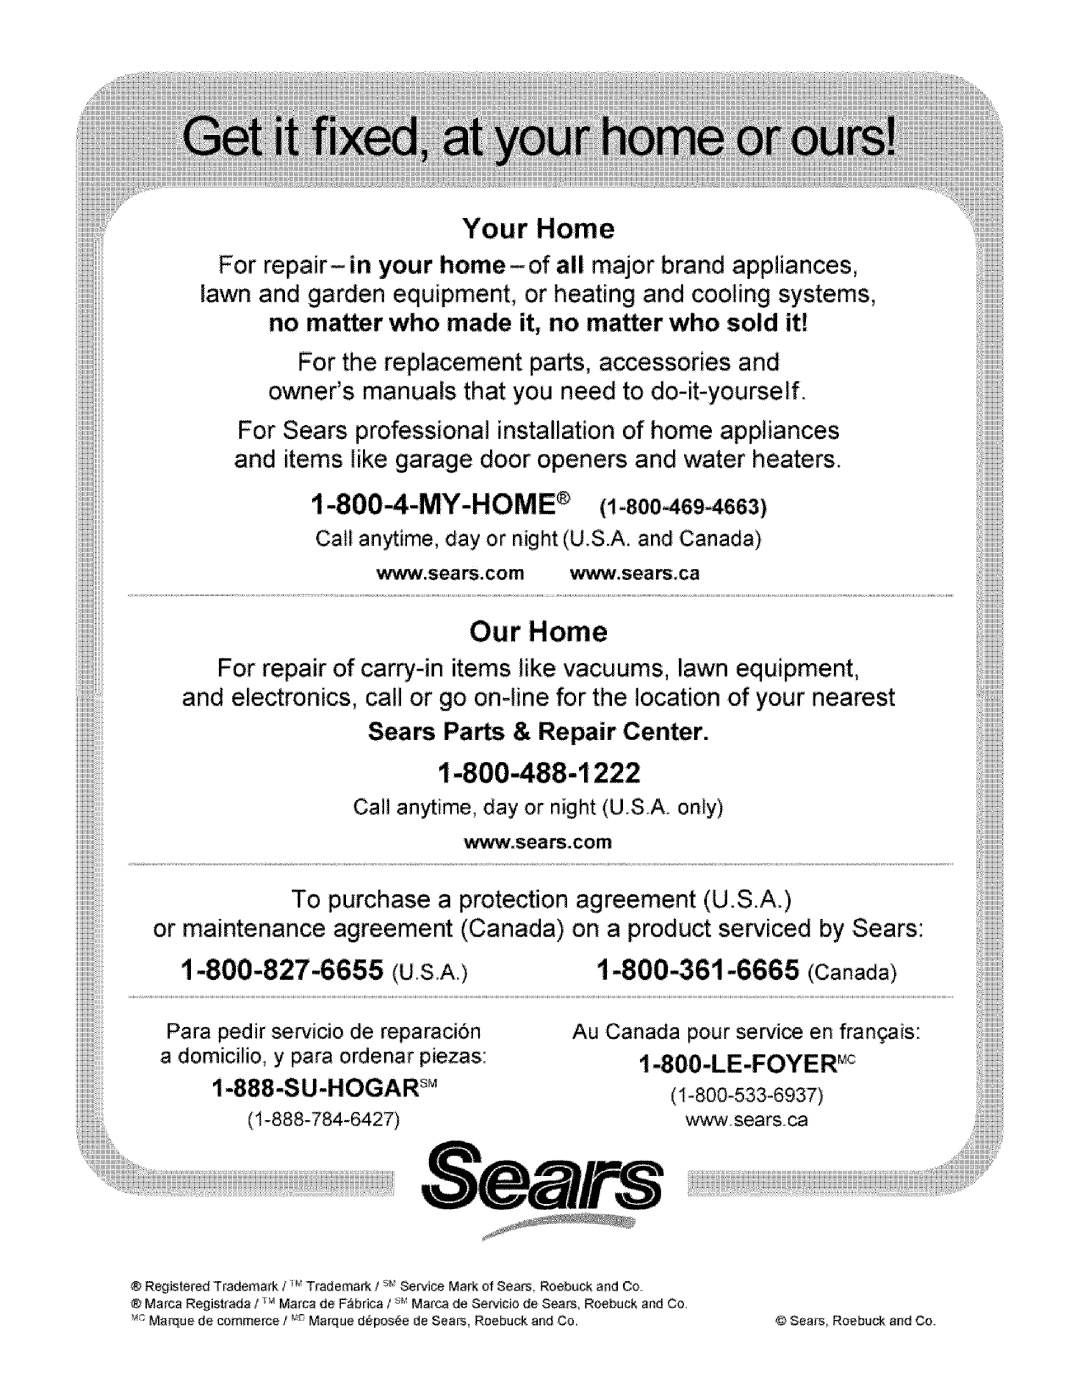 Kenmore 625.348261 owner manual Our Home, Sears Parts & Repair Center, SU-HOGAR sM, Your Home 